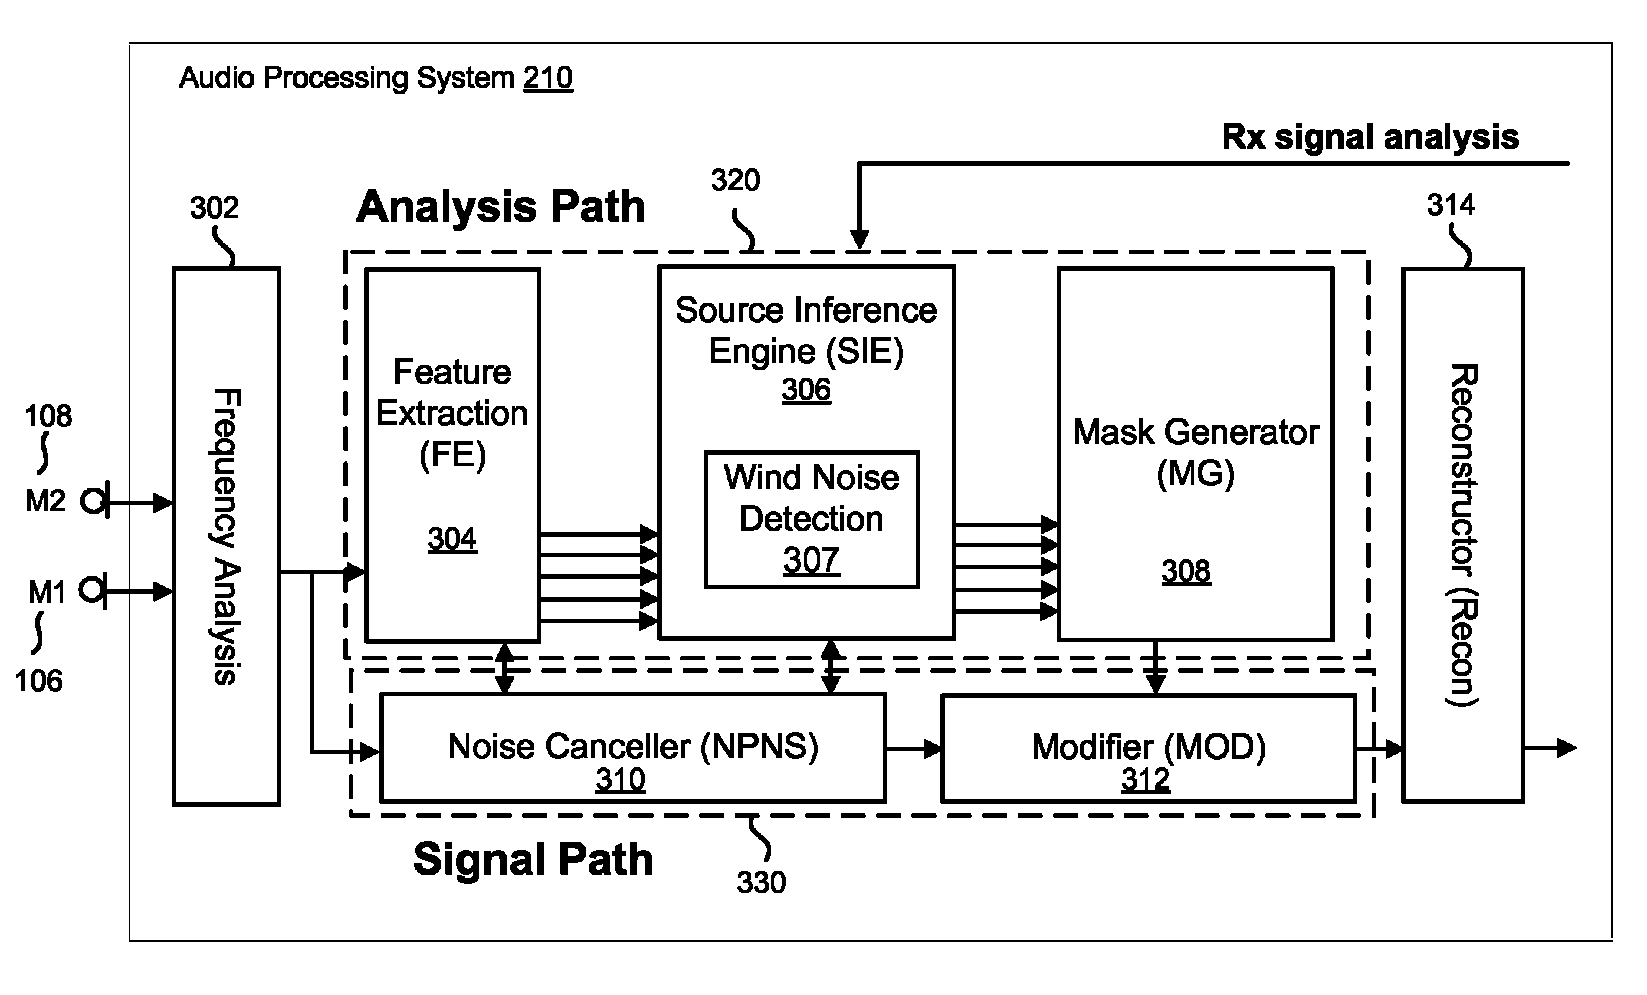 Wind noise detection and suppression